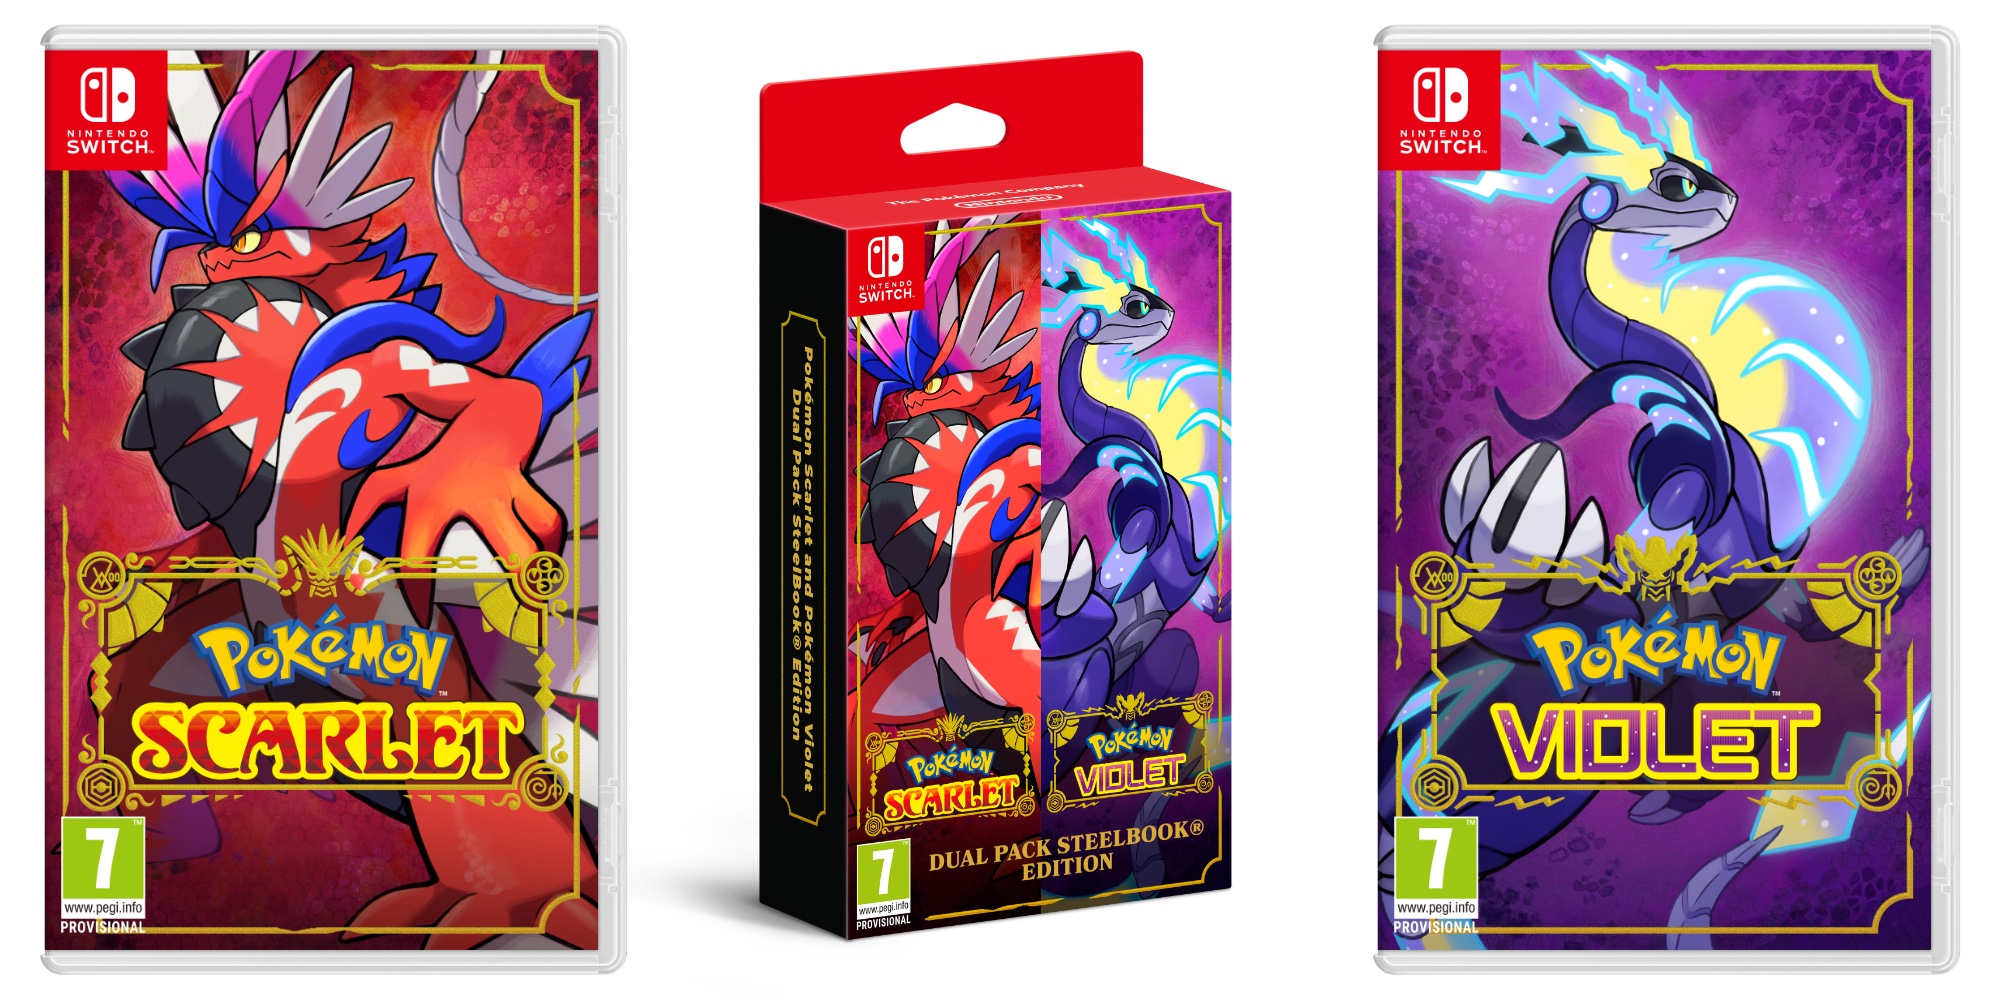 Pokémon Scarlet and Violet pre-orders now down at $49 shipped (Reg. $60